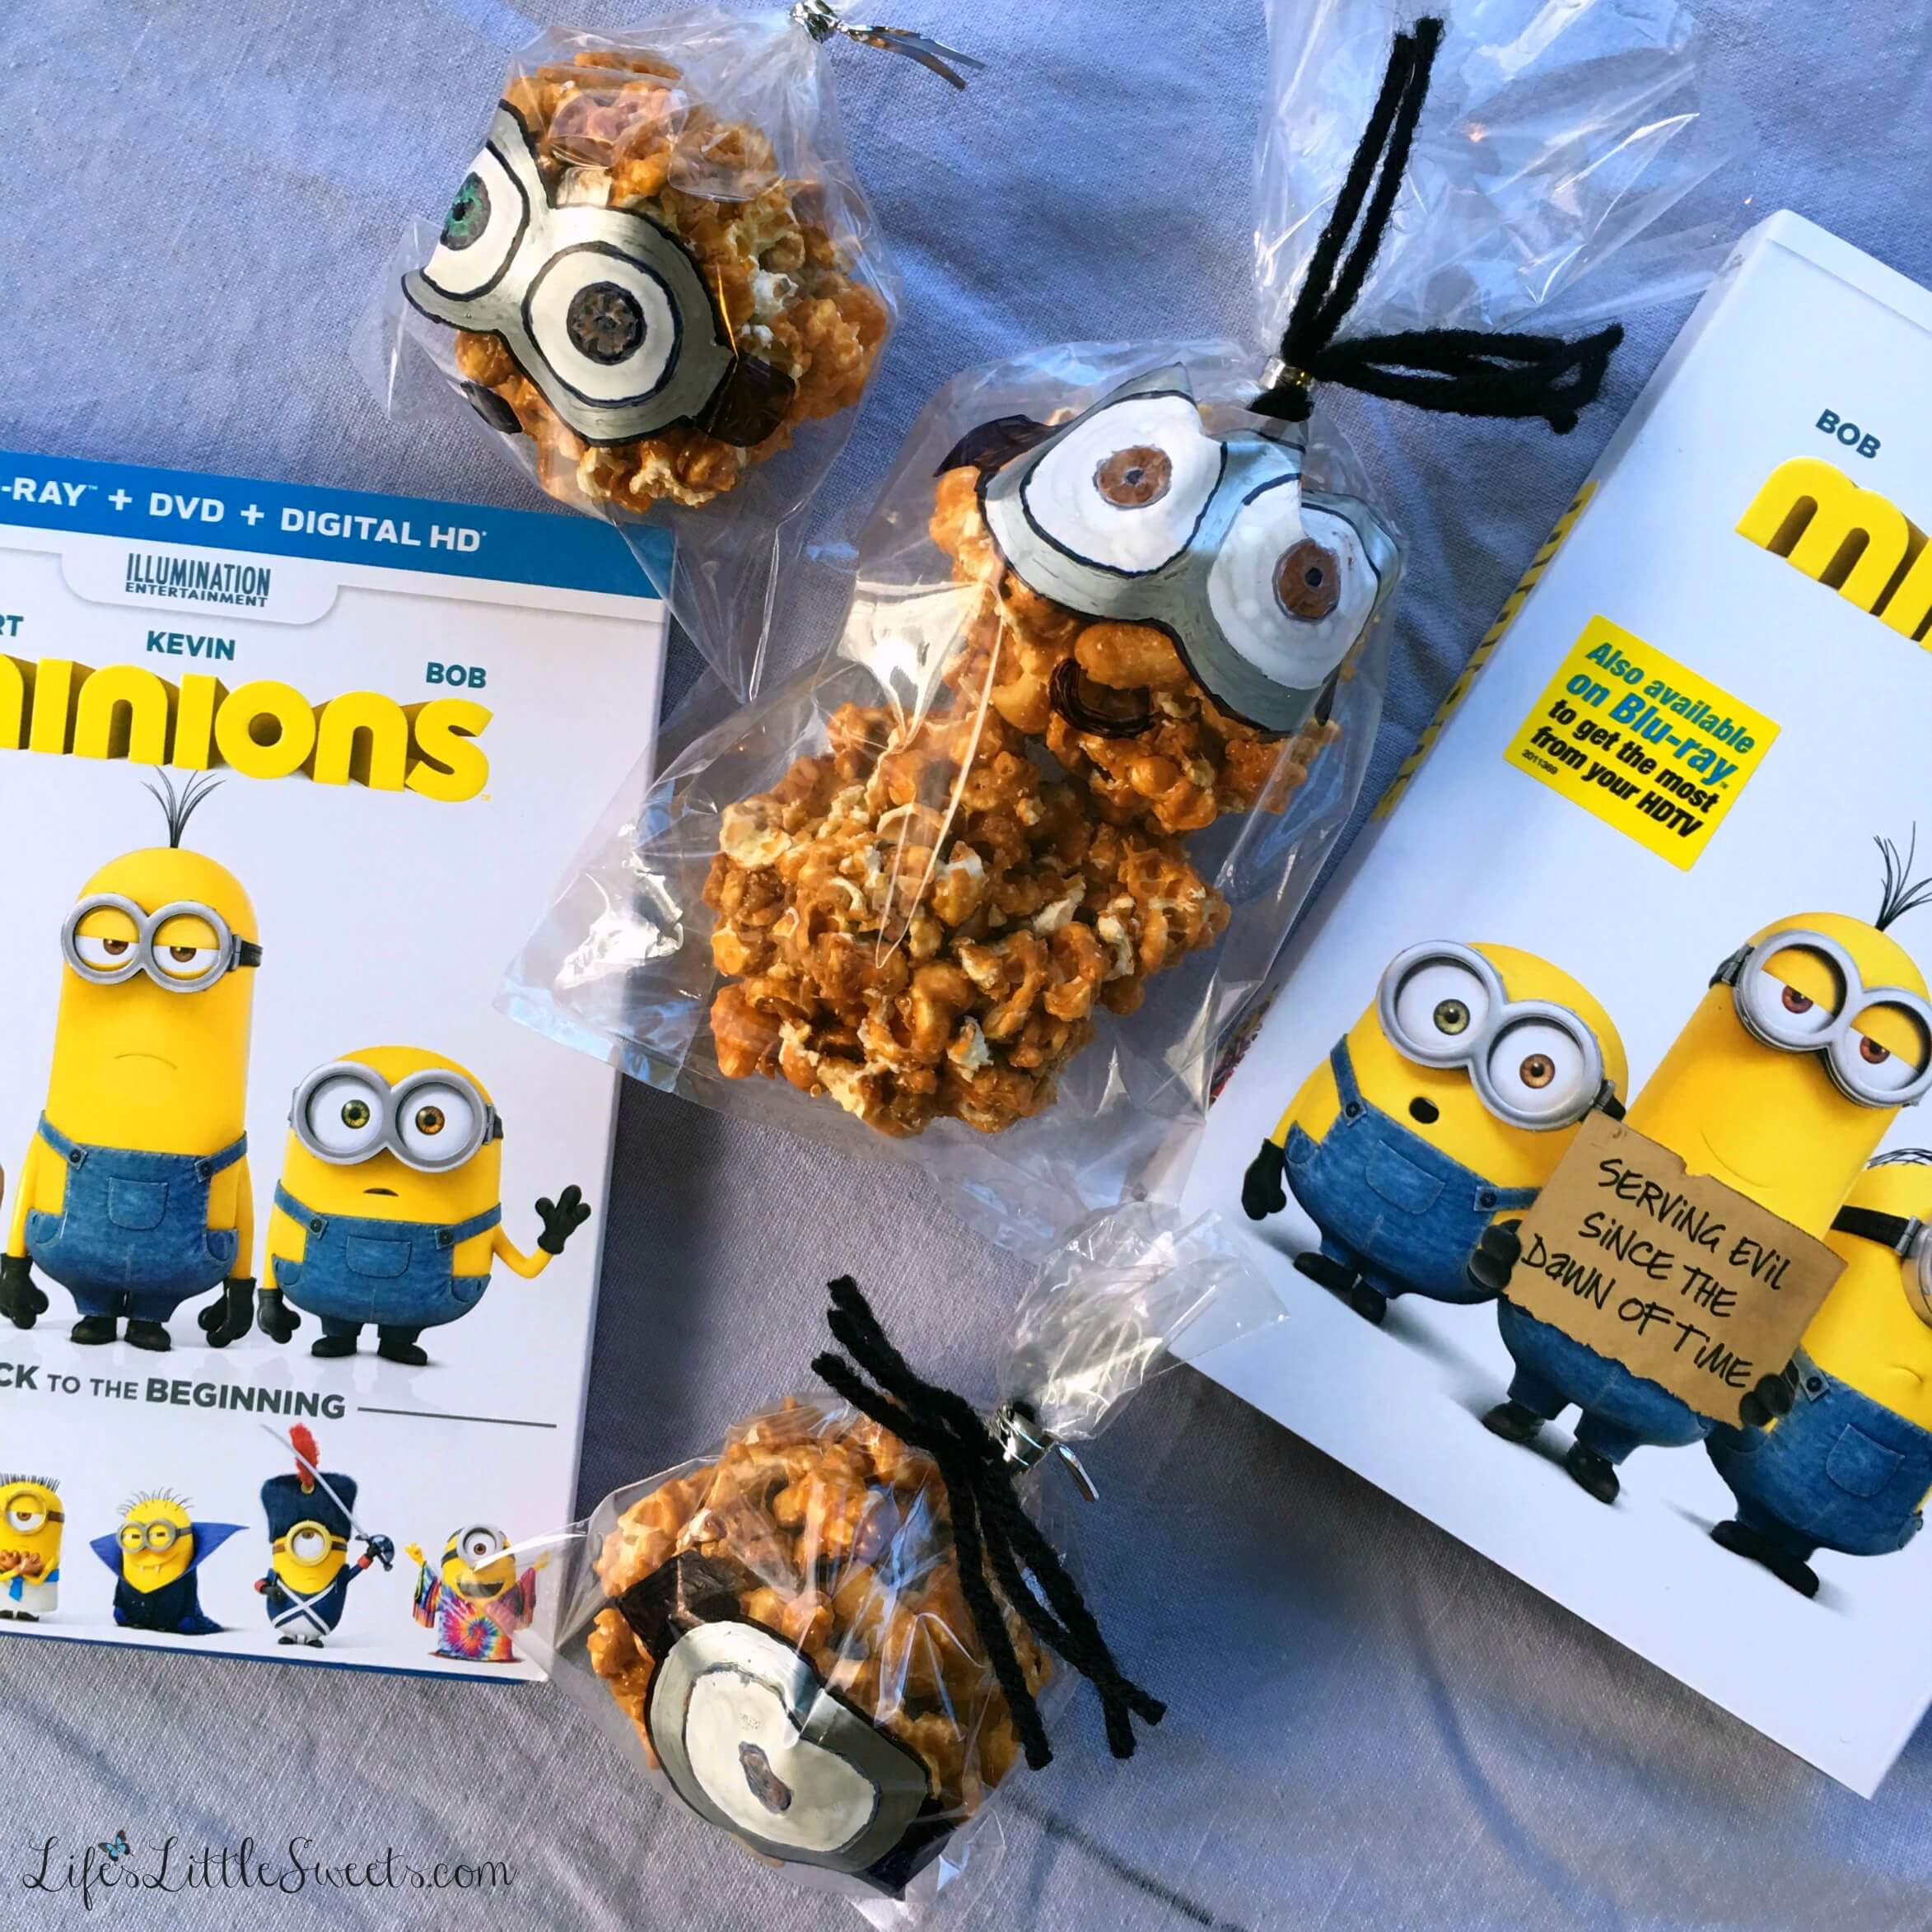 Halloween Recipes - This easy and simple Caramel Popcorn Balls recipe has only 4 ingredients including homemade Dutch Oven Popcorn! Check out my full tutorial on illustrating the treat bags for the Caramel Popcorn Balls just like the Minions movie characters “Stuart,” “Kevin” and “Bob” within this post! Enjoy these Caramel Popcorn Balls during your #MinionsMovieNight! #MinionsMovieNight #ad #CollectiveBias